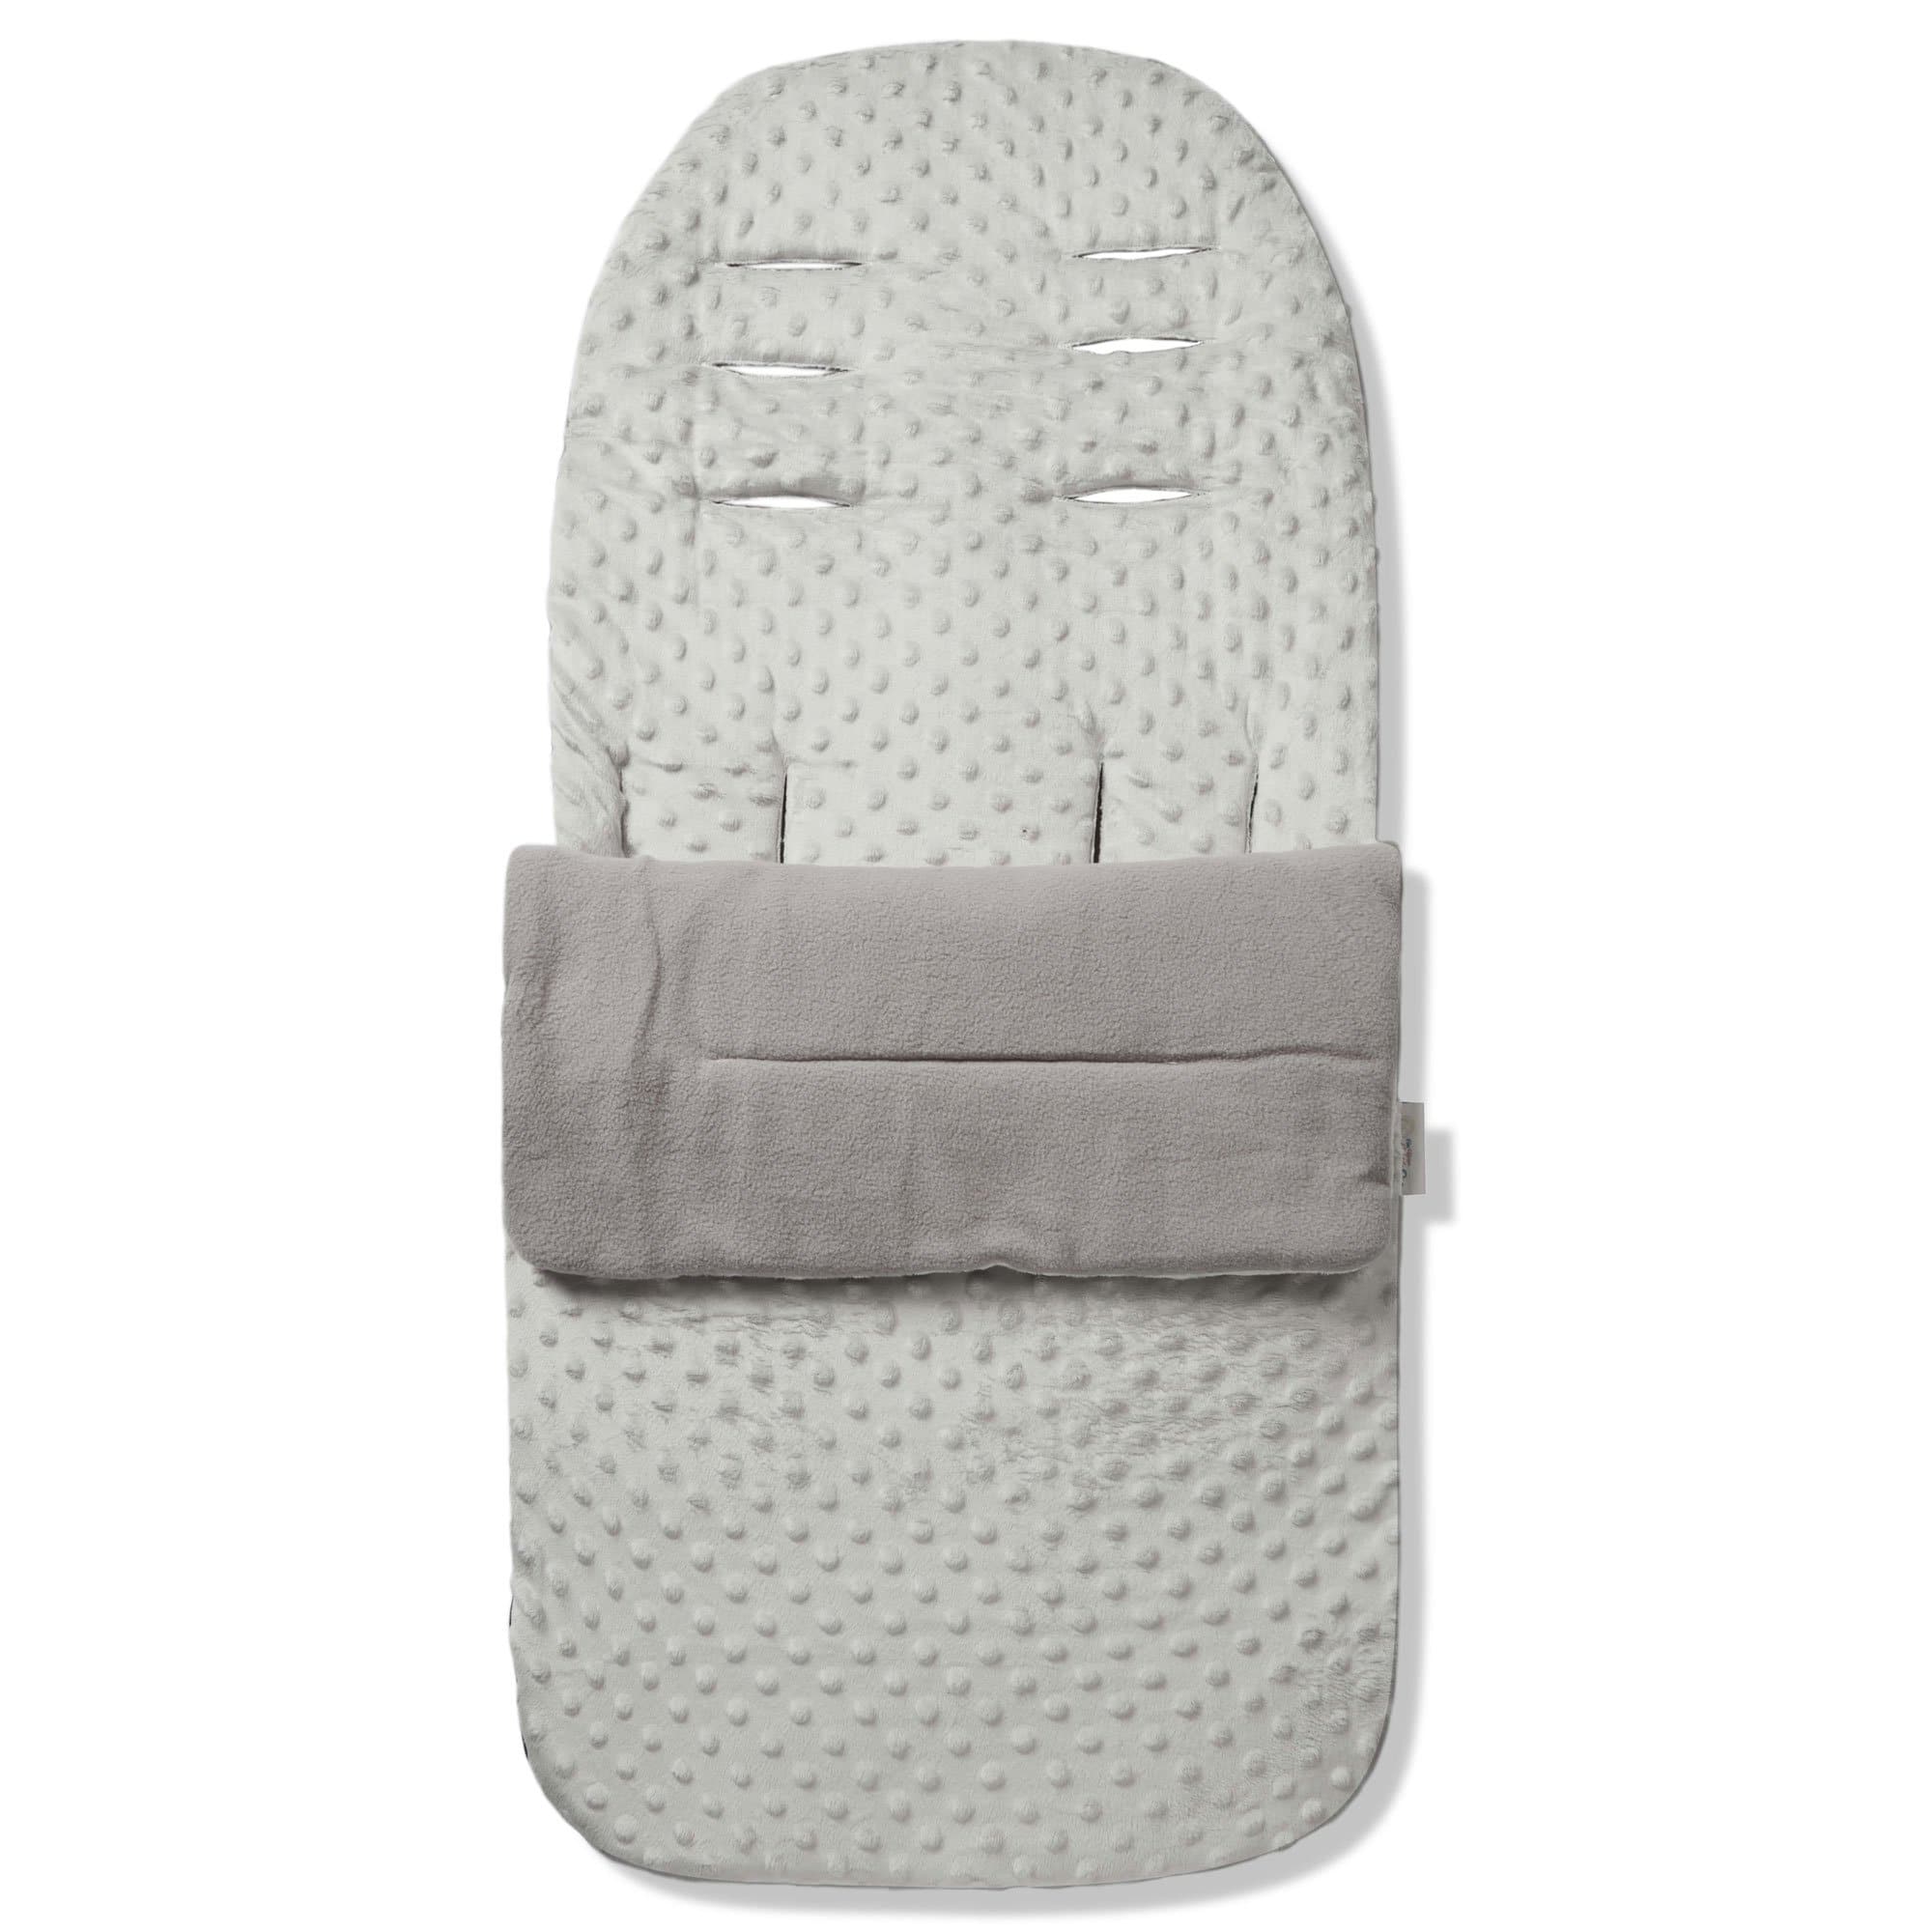 Dimple Footmuff / Cosy Toes Compatible with Hesba - Grey / Fits All Models | For Your Little One